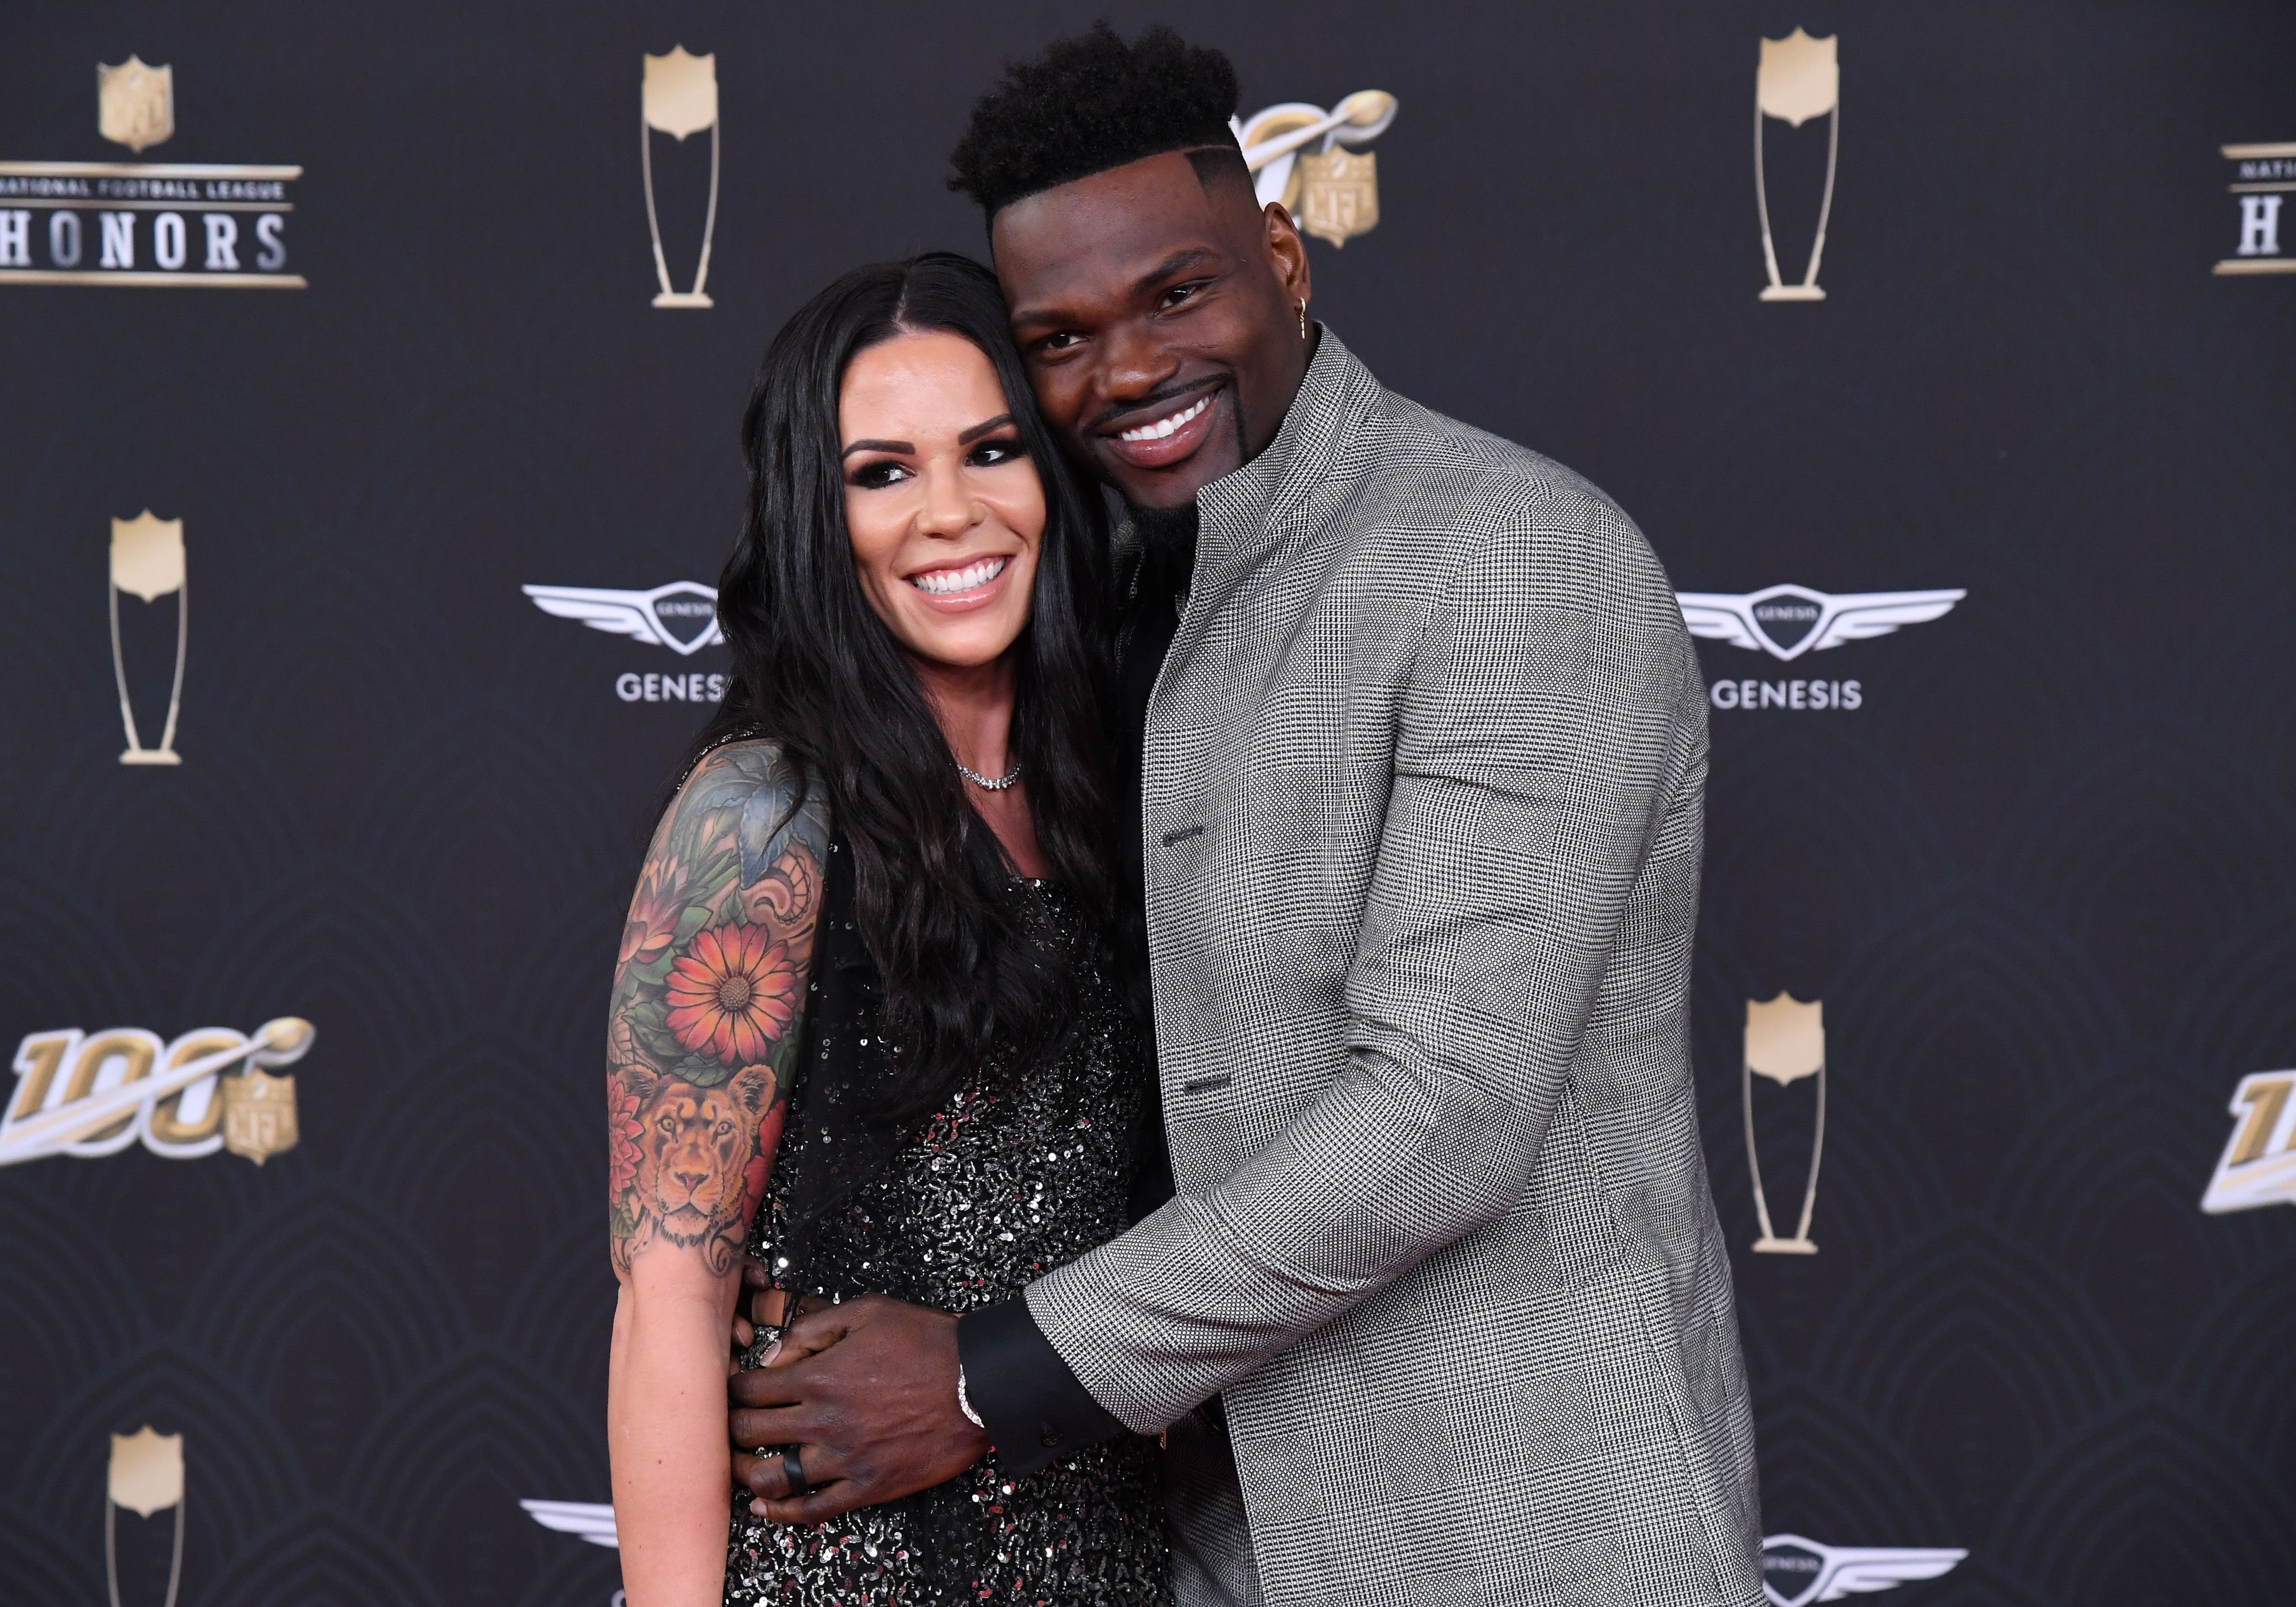 Jordanna Barrett and Shaquil Barrett at the 9th Annual NFL Honors in 2020, in Miami, Florida. | Source: Getty Images